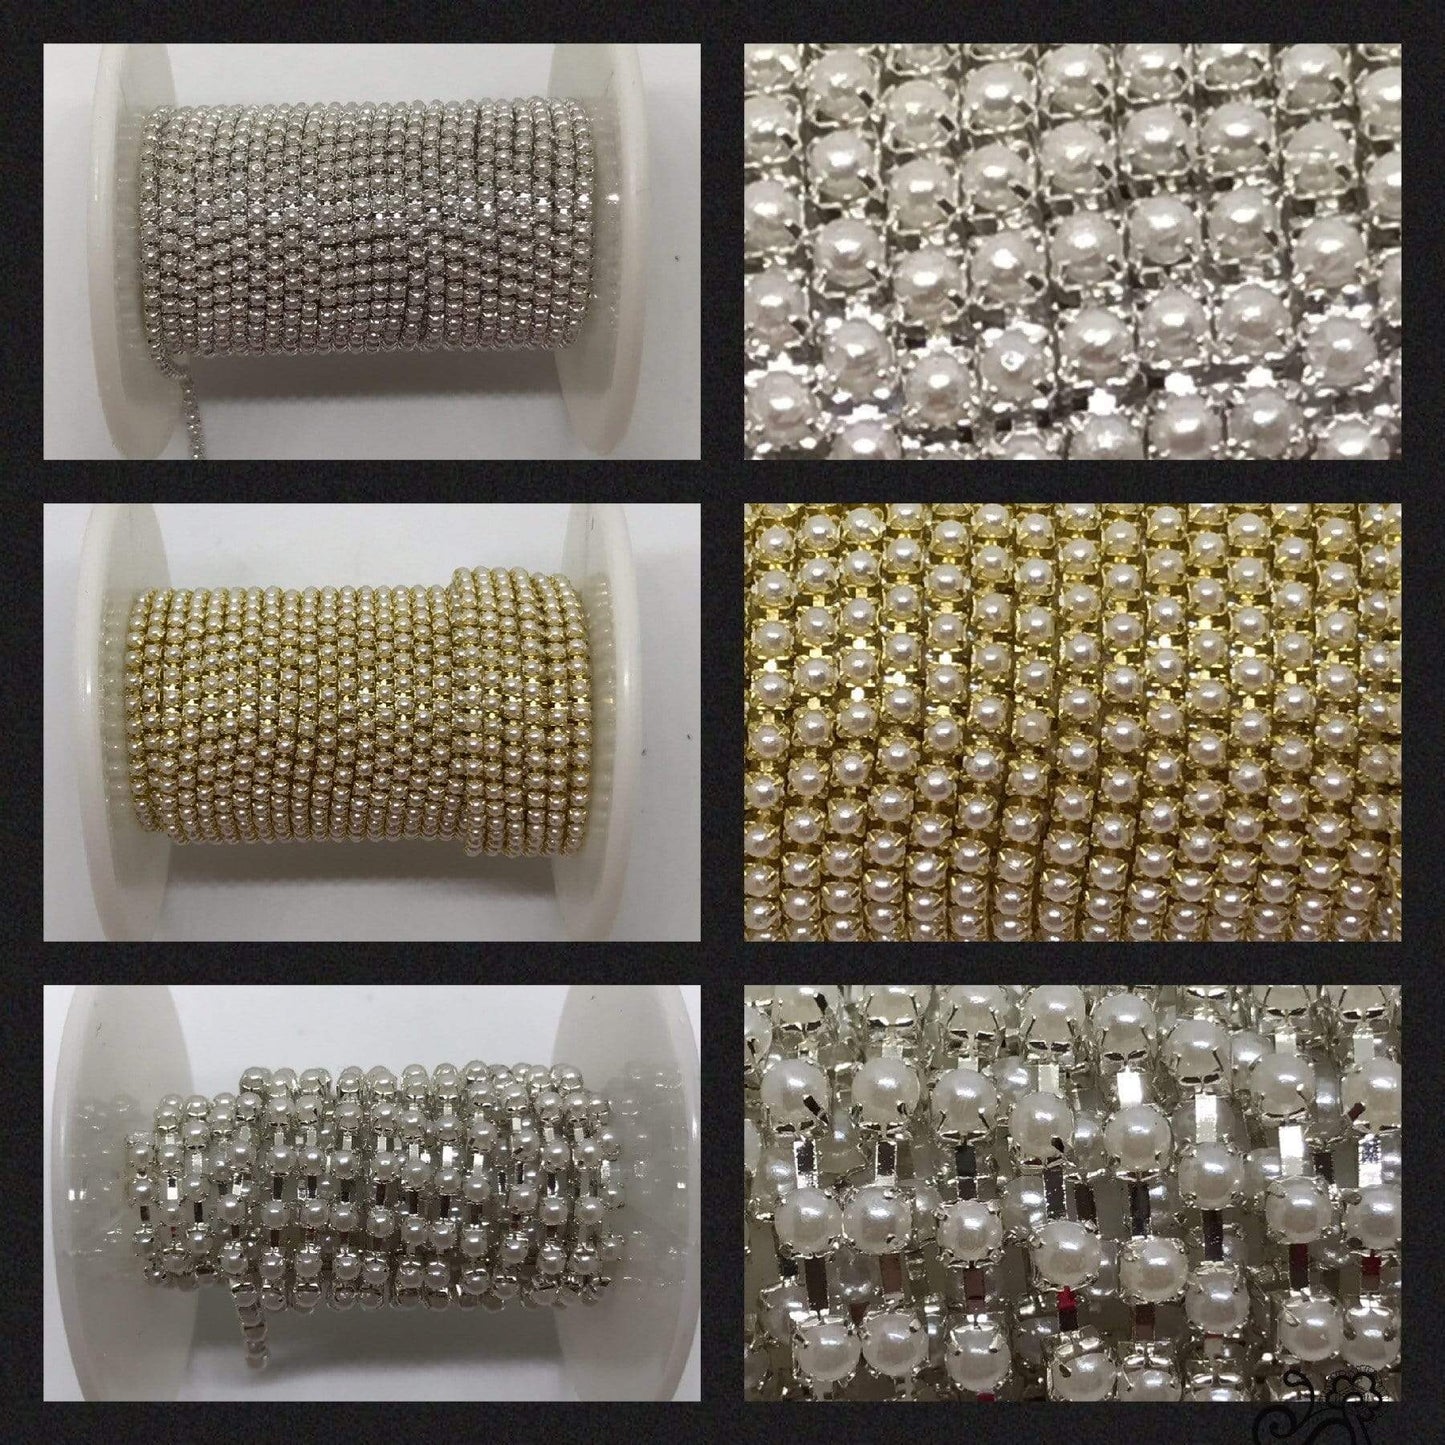 Sundaylace Creations & Bling SS6 Metal Rhinestone Chain Ss6 & Ss12 White/Ivory Pearl Stone,  Silver or Gold Metal Rhinestone Chain